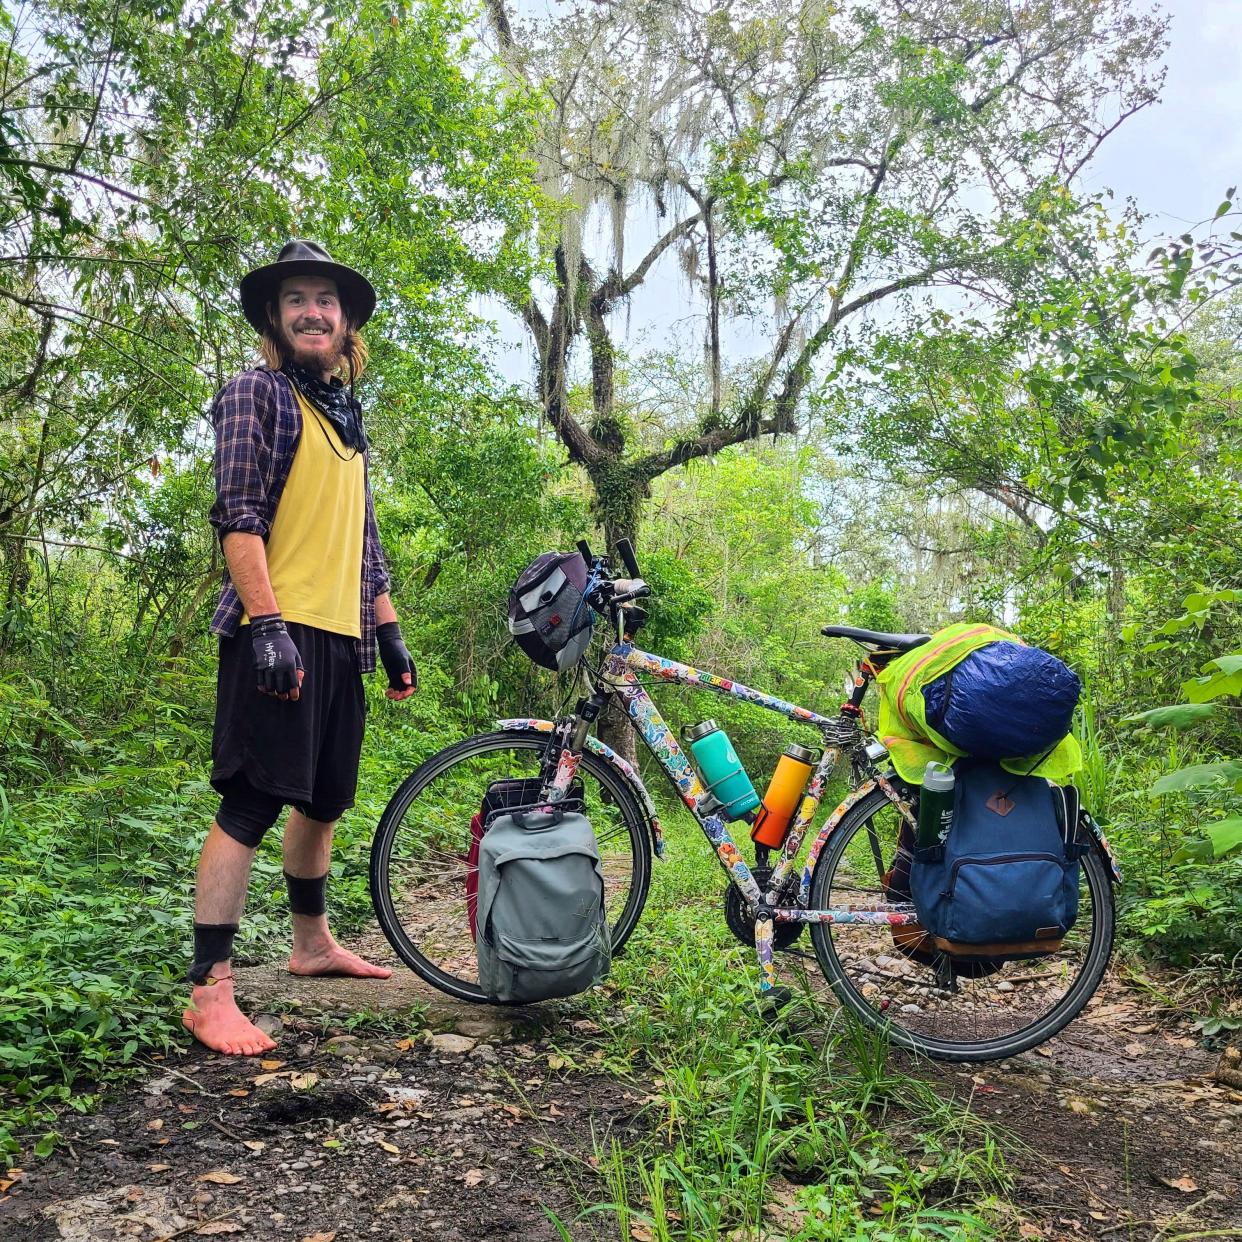 Daniel James of Canton on a remote road in Central America. He recently completed a solo cycling journey there while riding barefoot. Since 2017, James, 28, has visited 13 countries by way of his  bicycle.